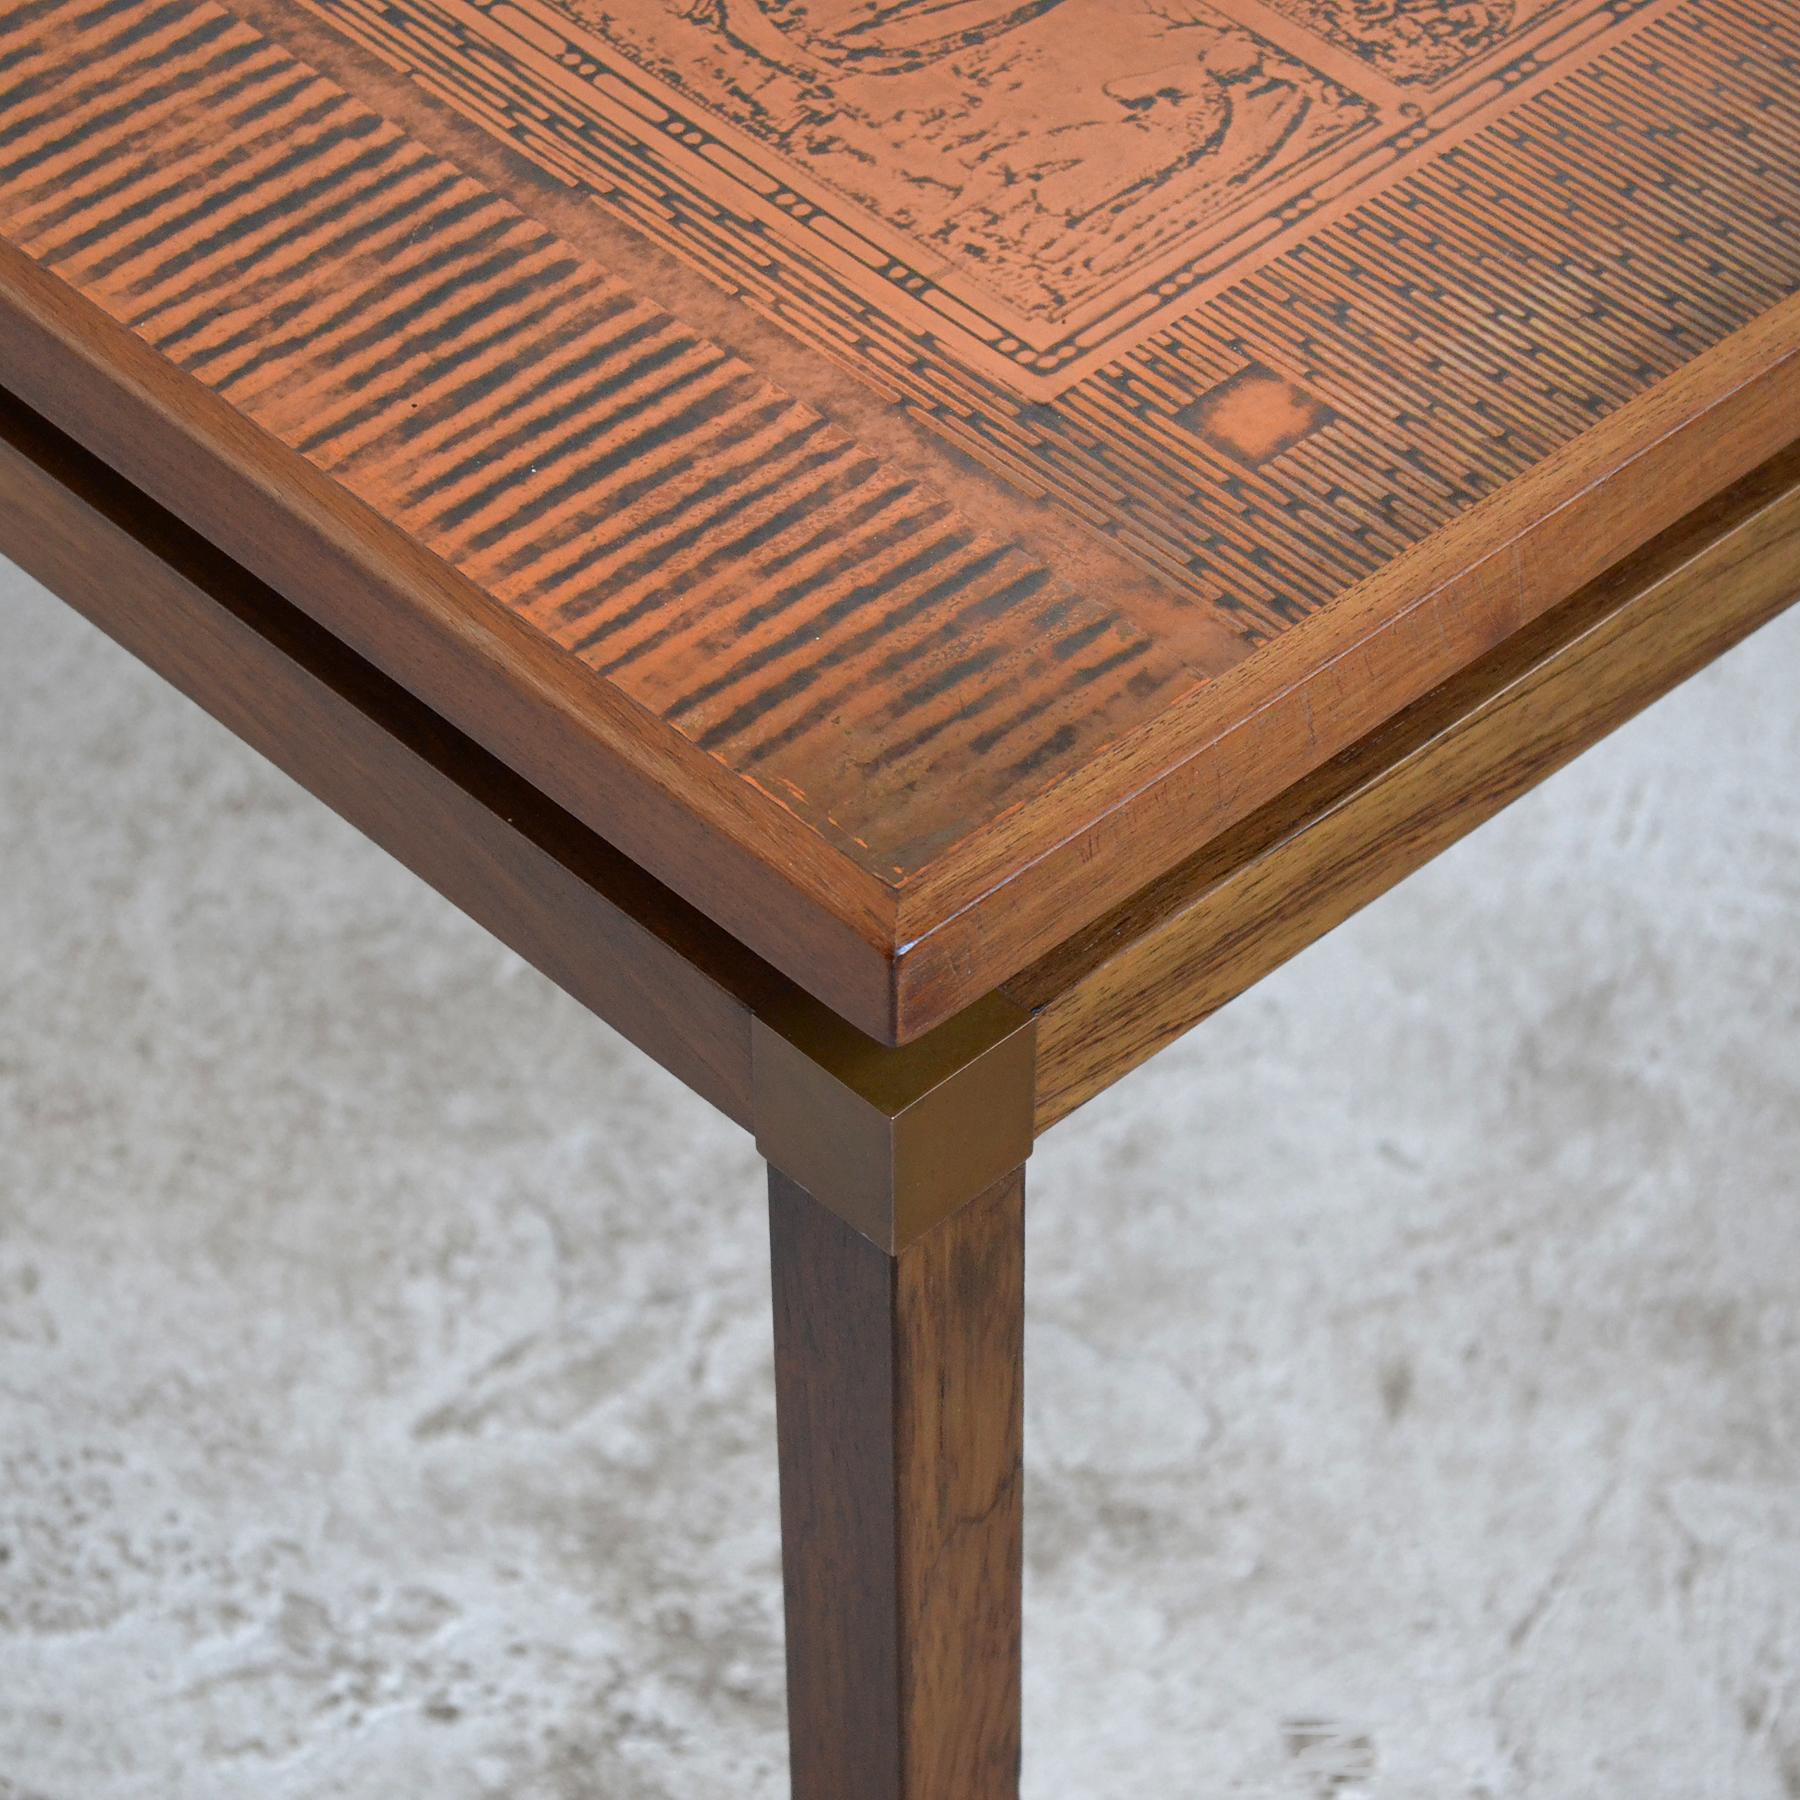 Scandinavian Modern Danish Rosewood Coffee Table with Etched Copper Top